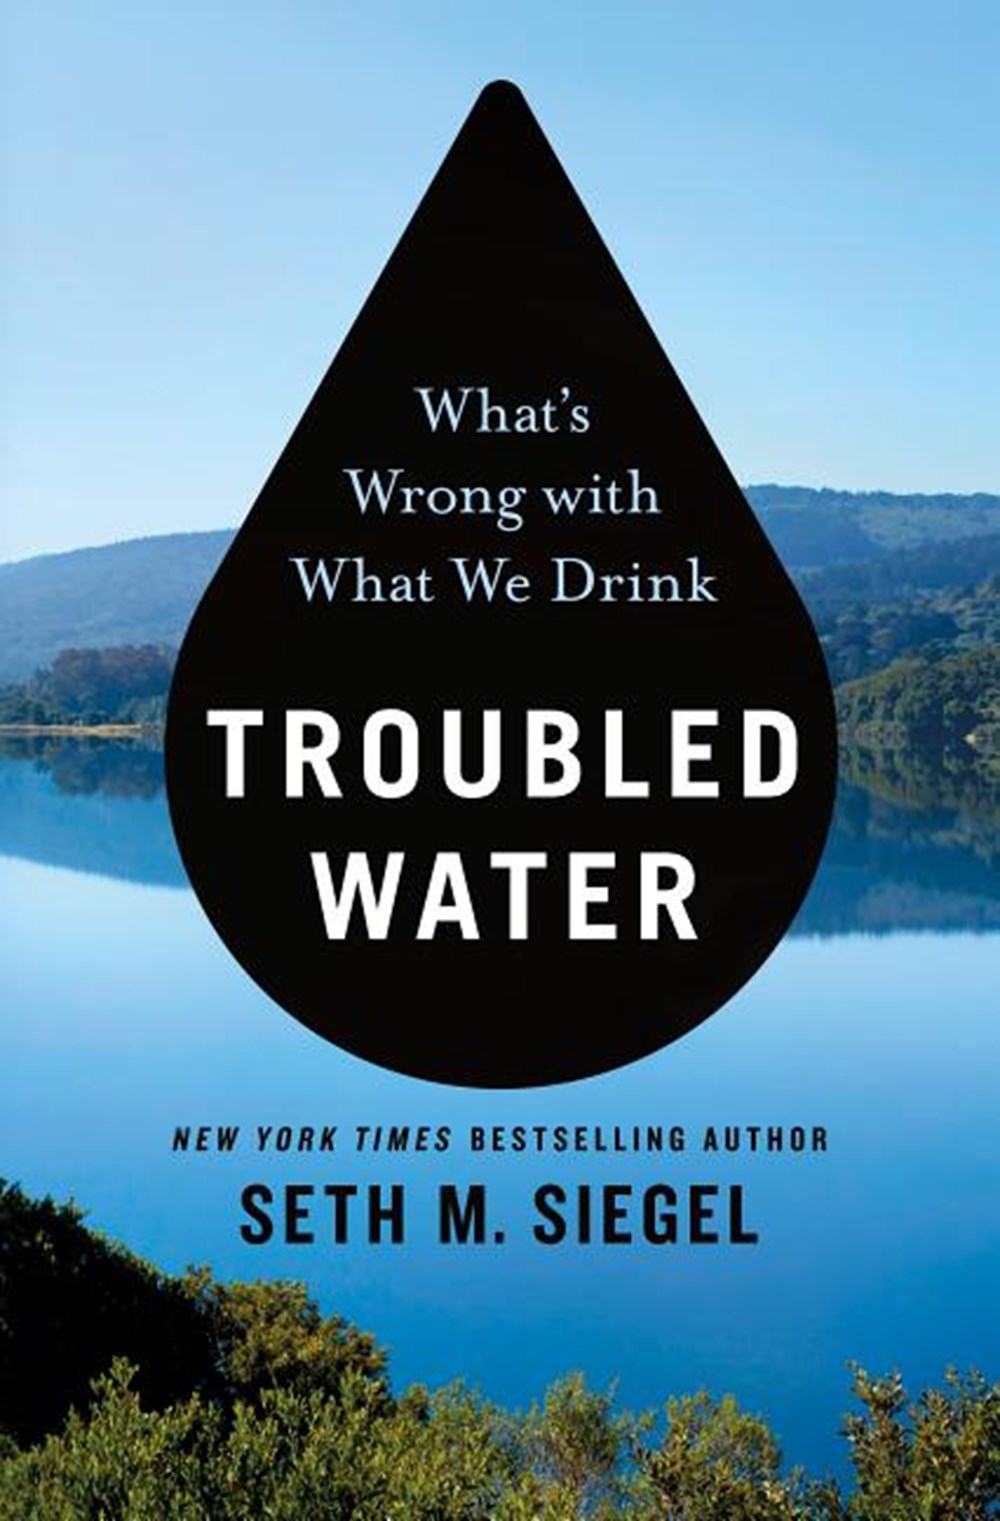 Troubled Water: What's Wrong with What We Drink